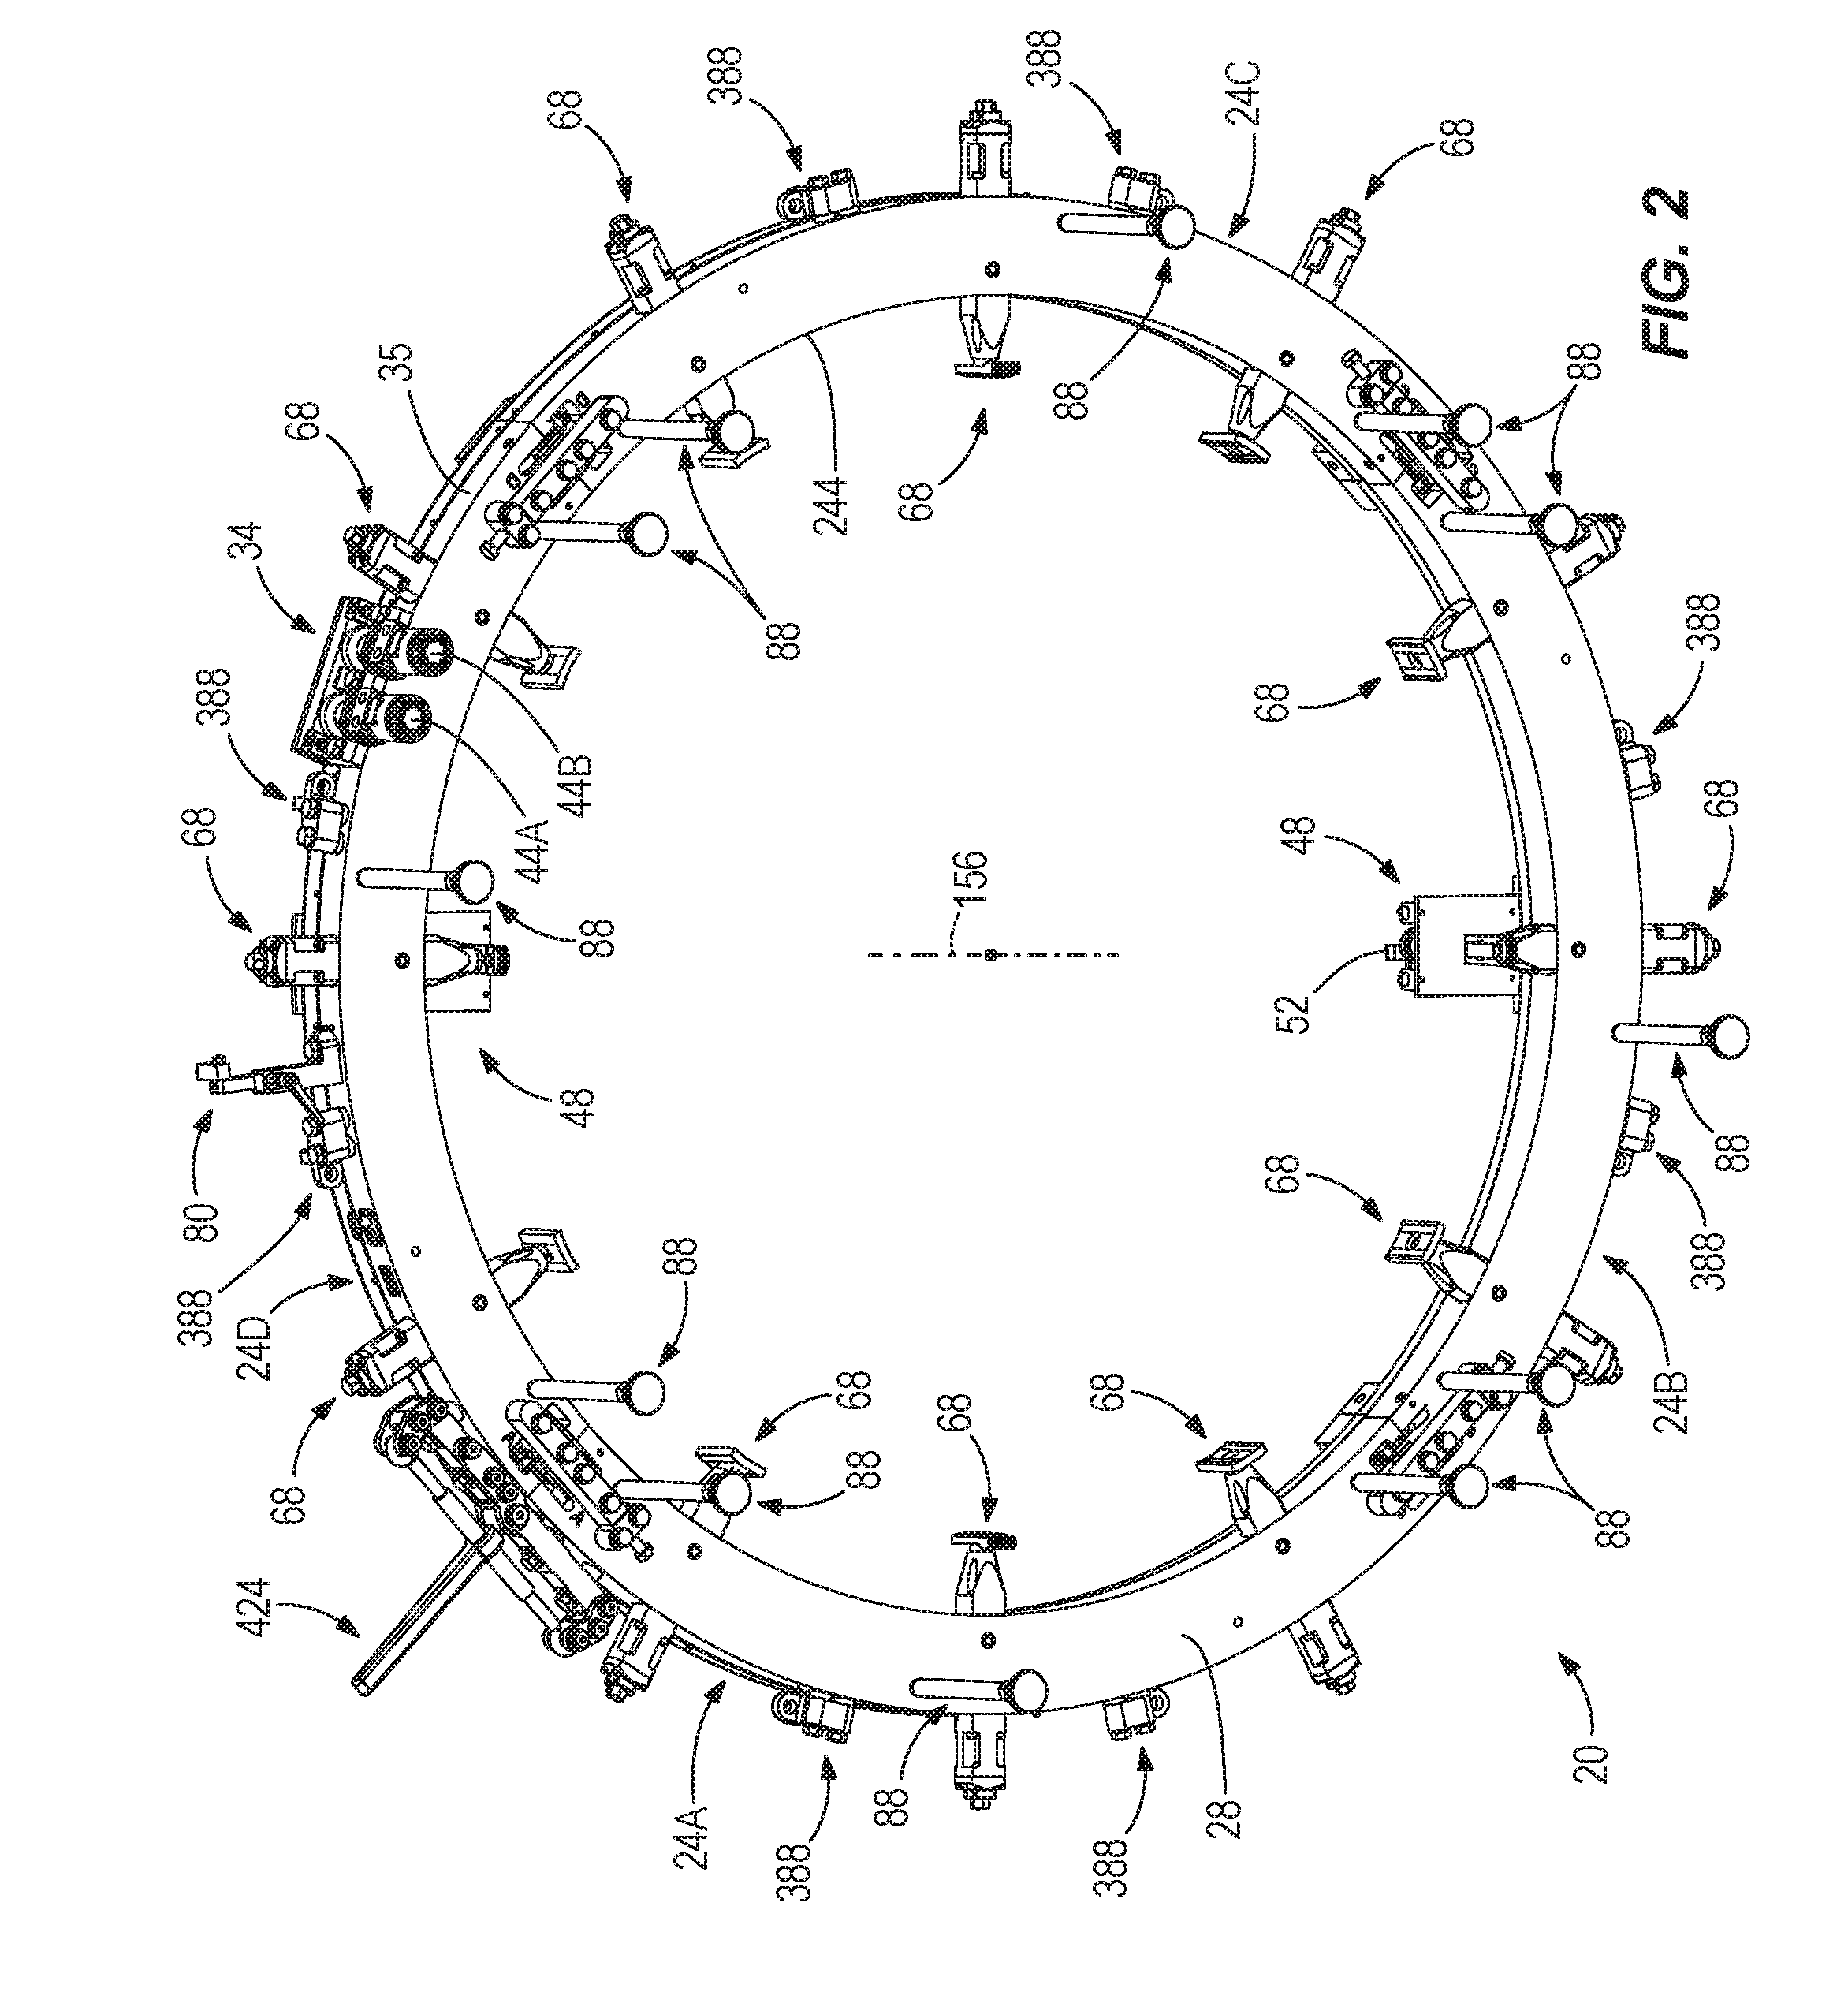 Pipe machining apparatuses and methods of operating the same